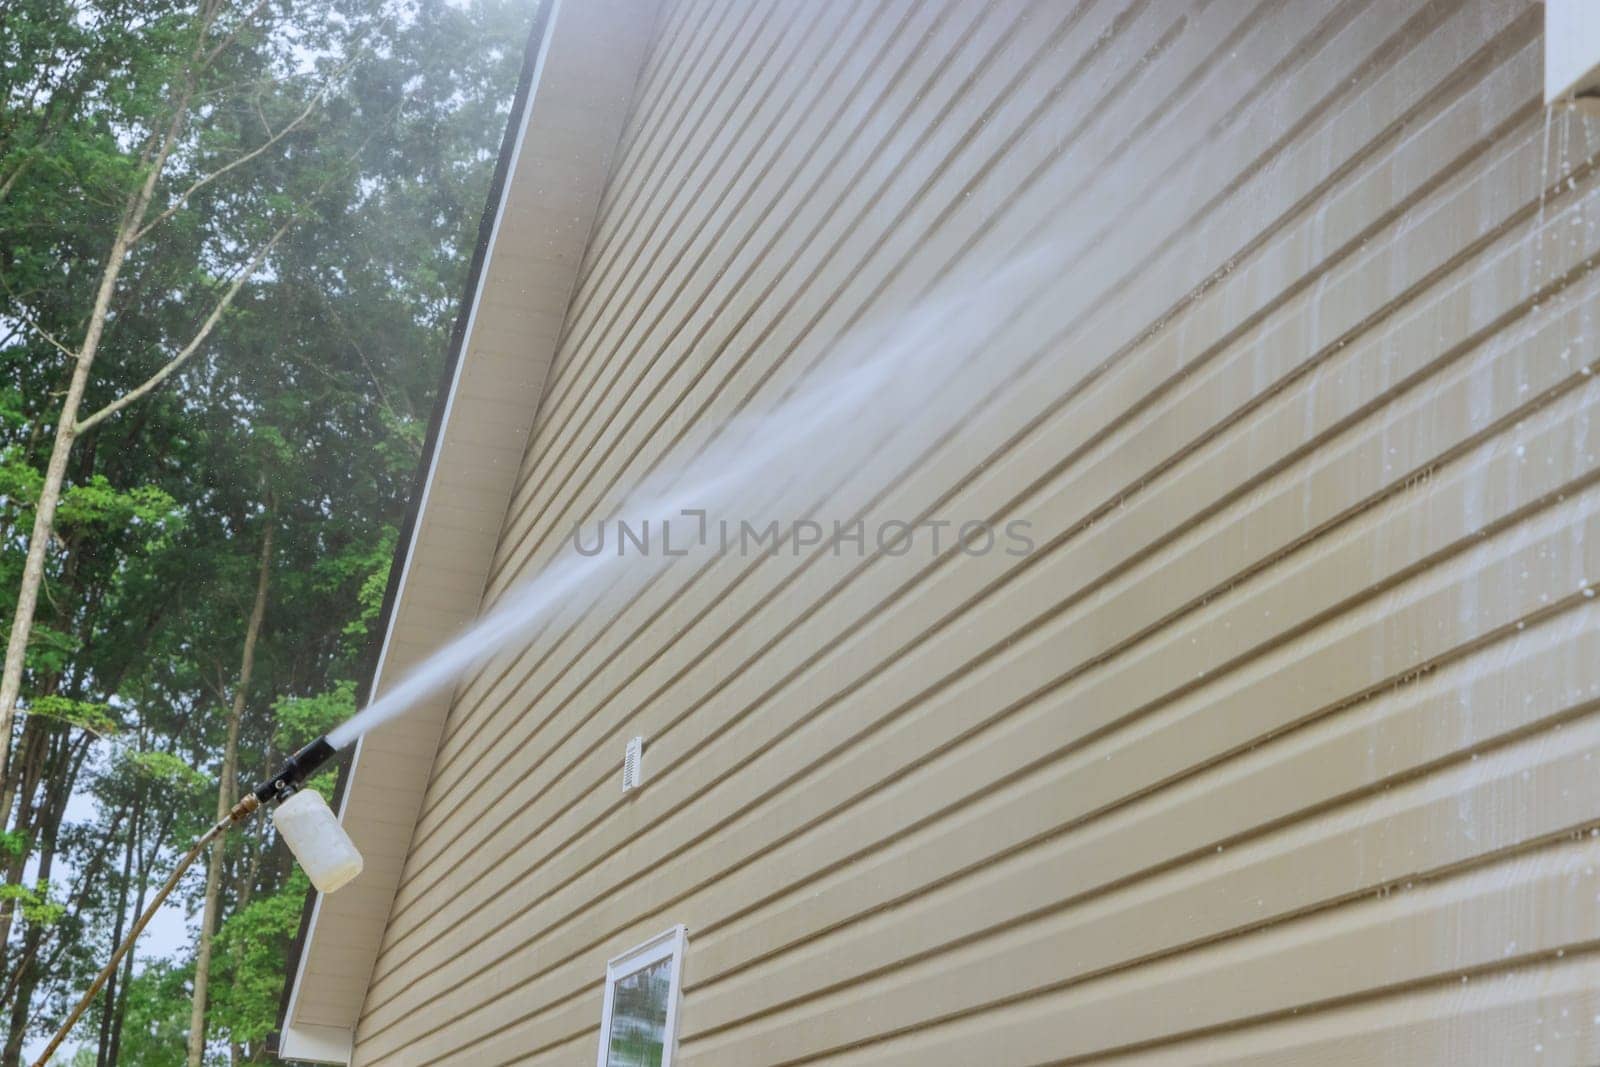 Service man in washing siding houses by using high pressure nozzles spray water soap cleaner